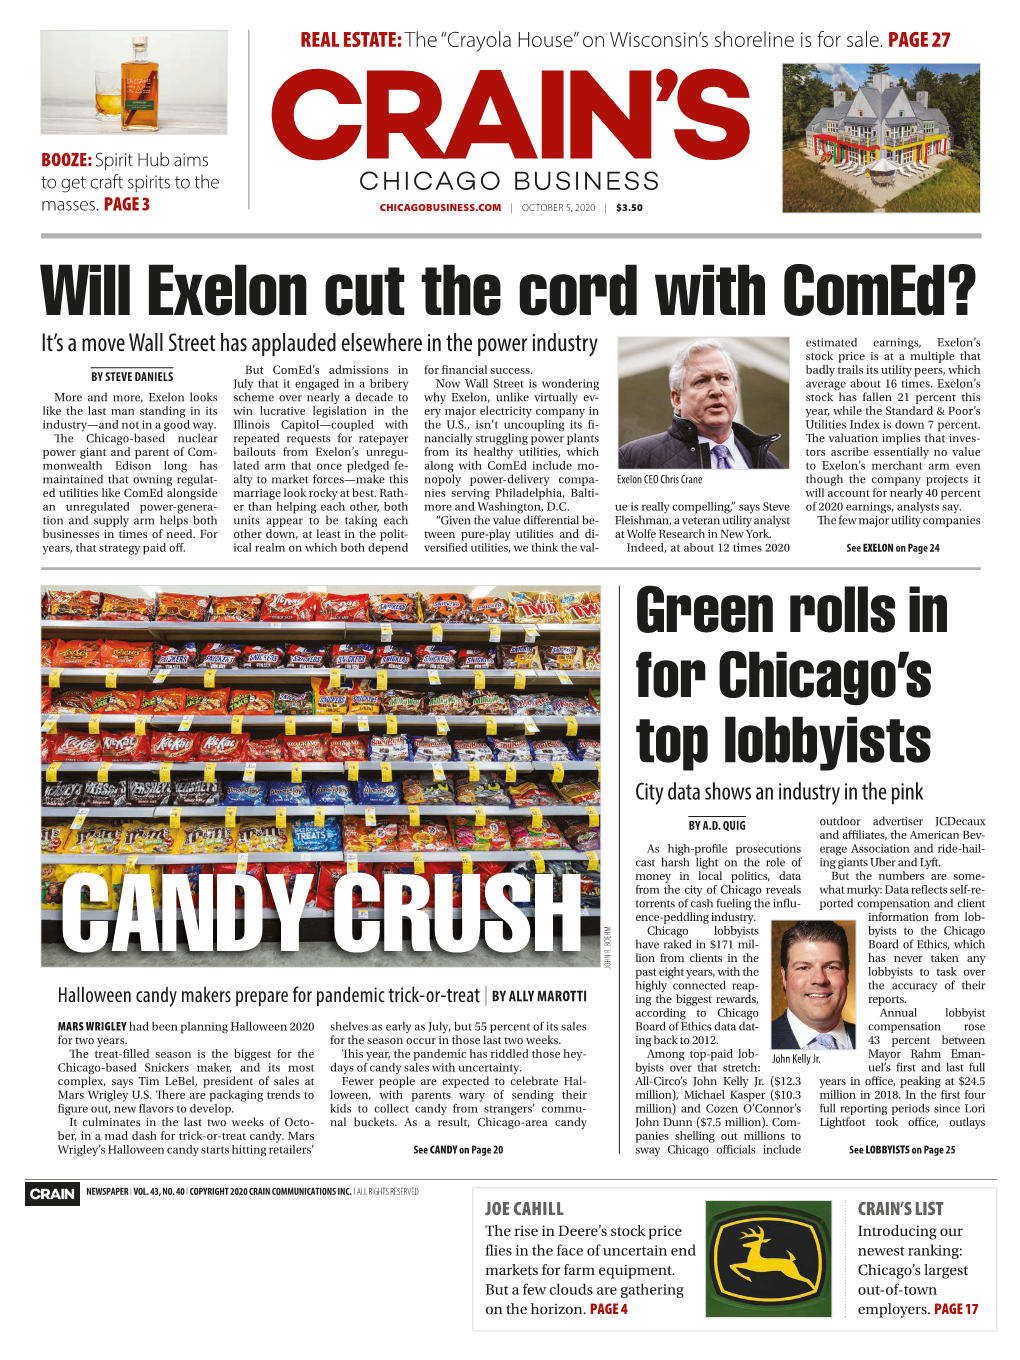 Will Exelon Cut the Cord with Comed?